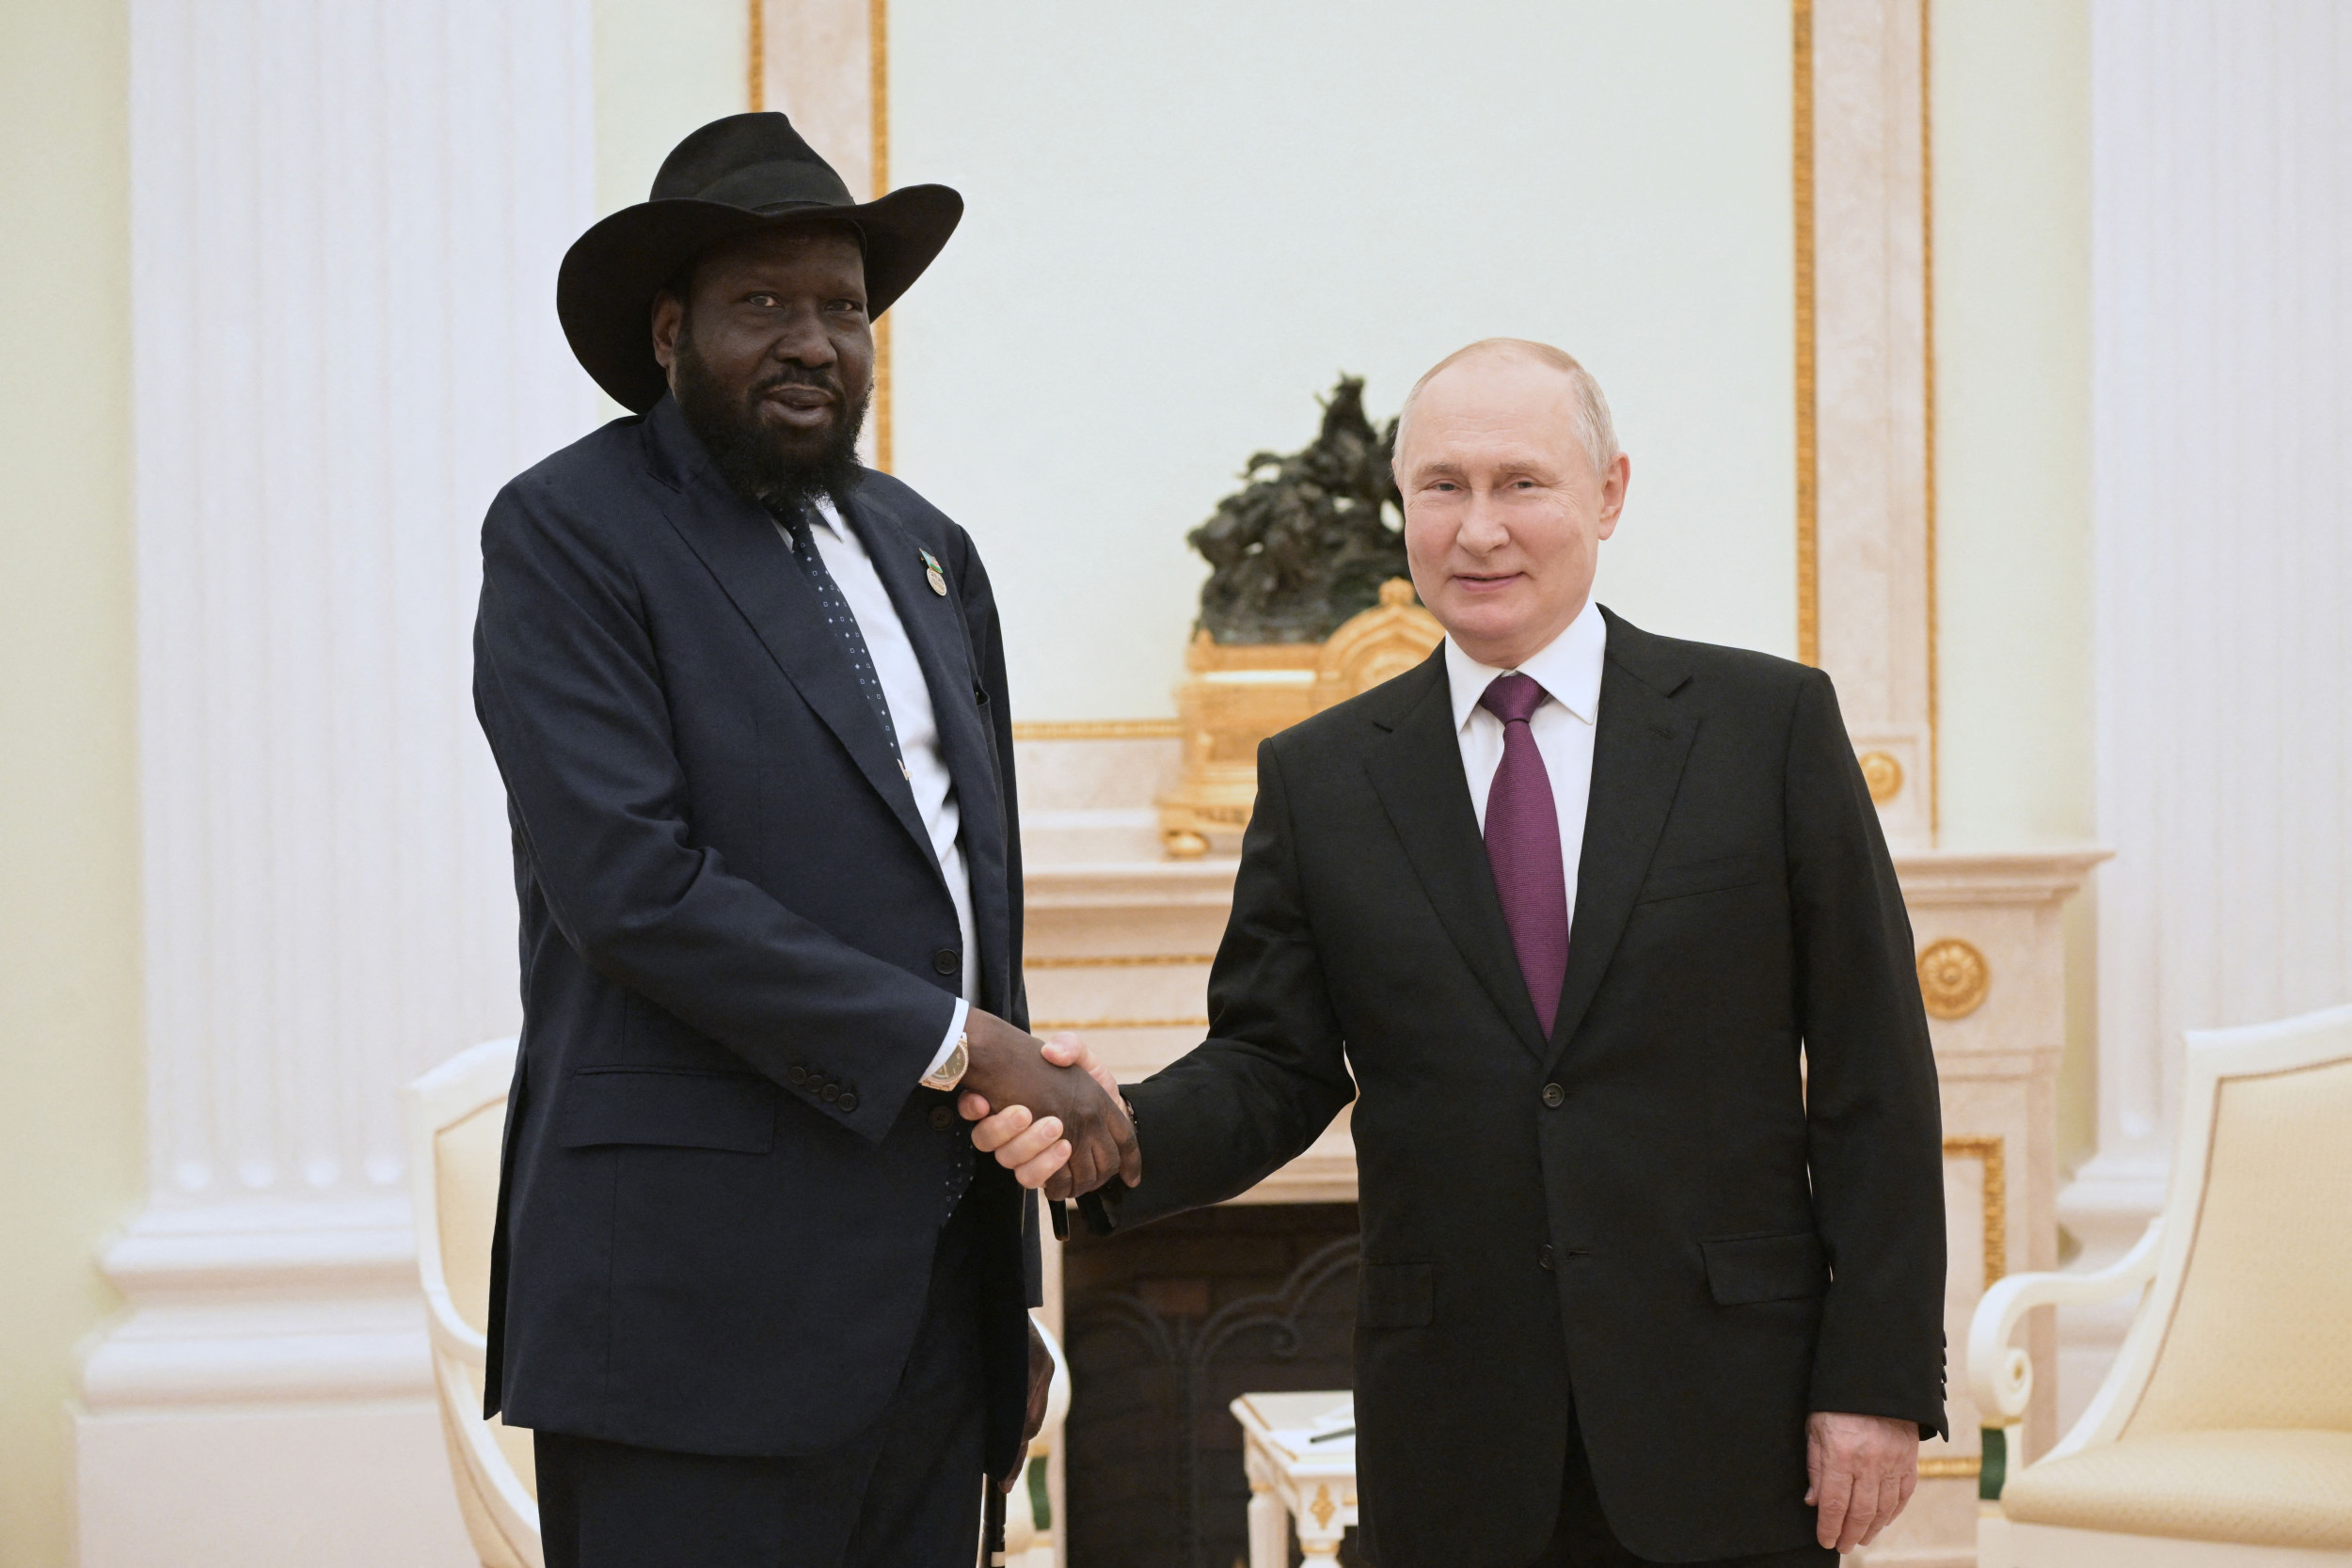 While the World's Eyes Are Elsewhere, Russia Makes Gains in Africa - Newsweek